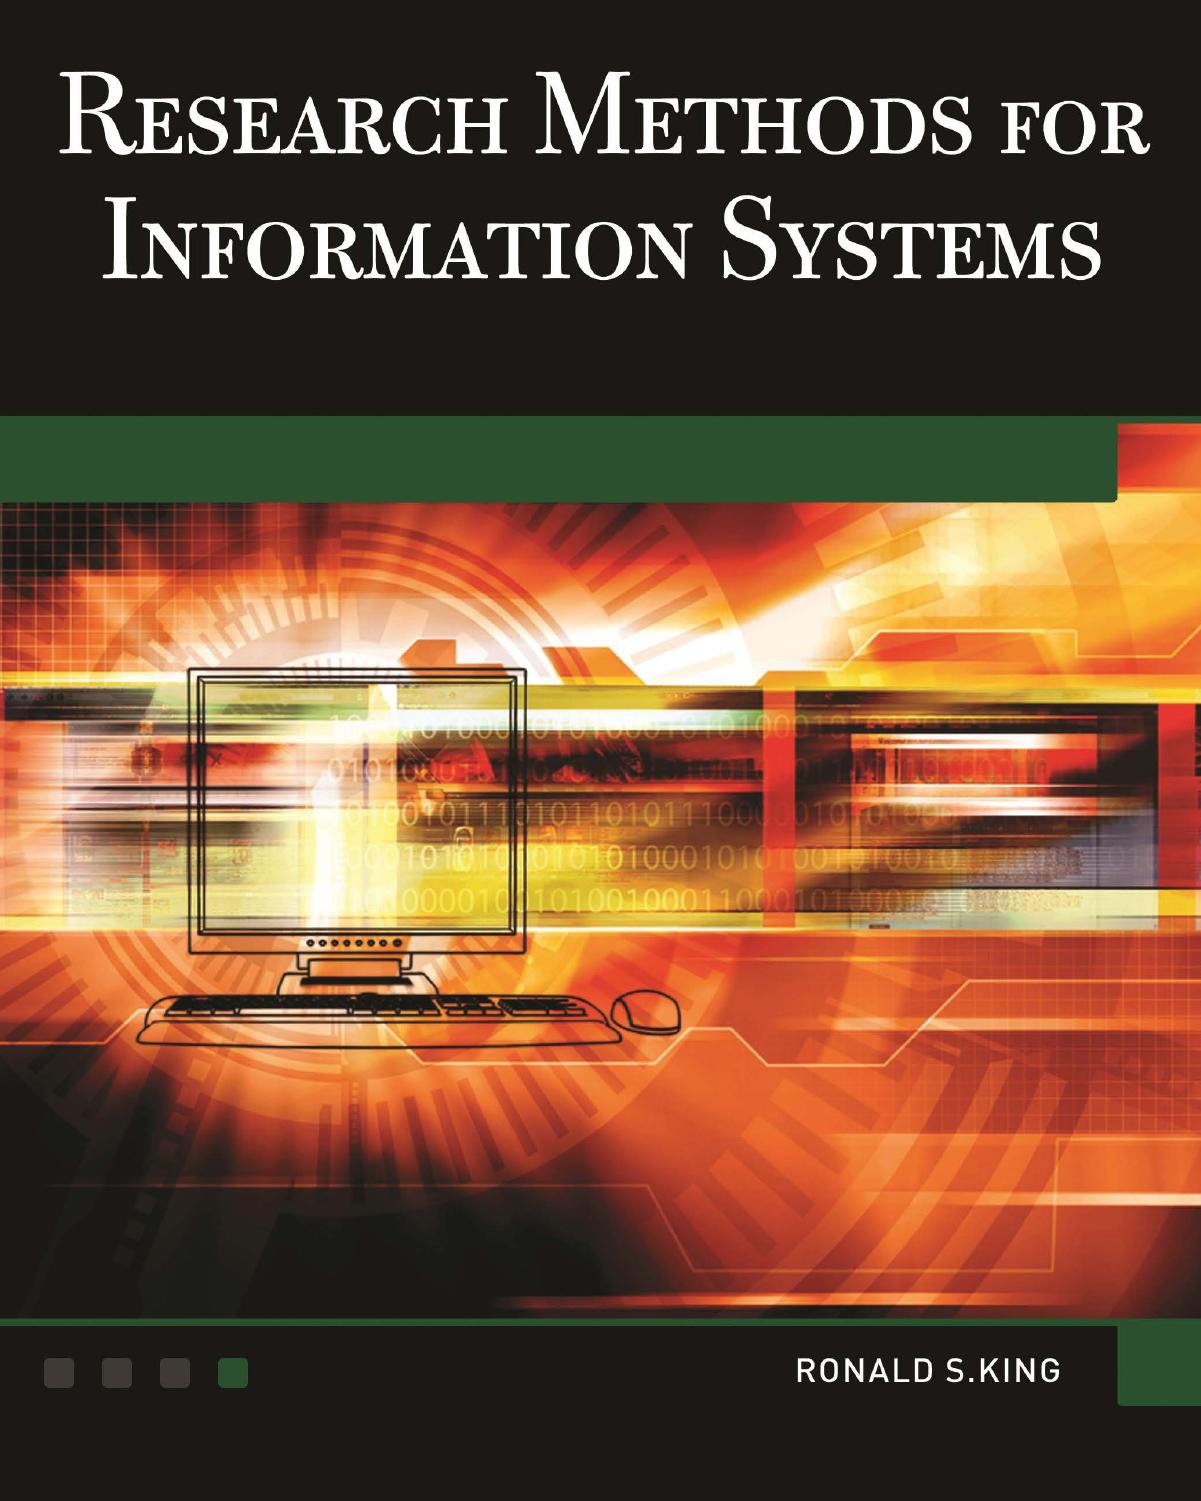 Research Methods for Information Systems by Ronald S. King